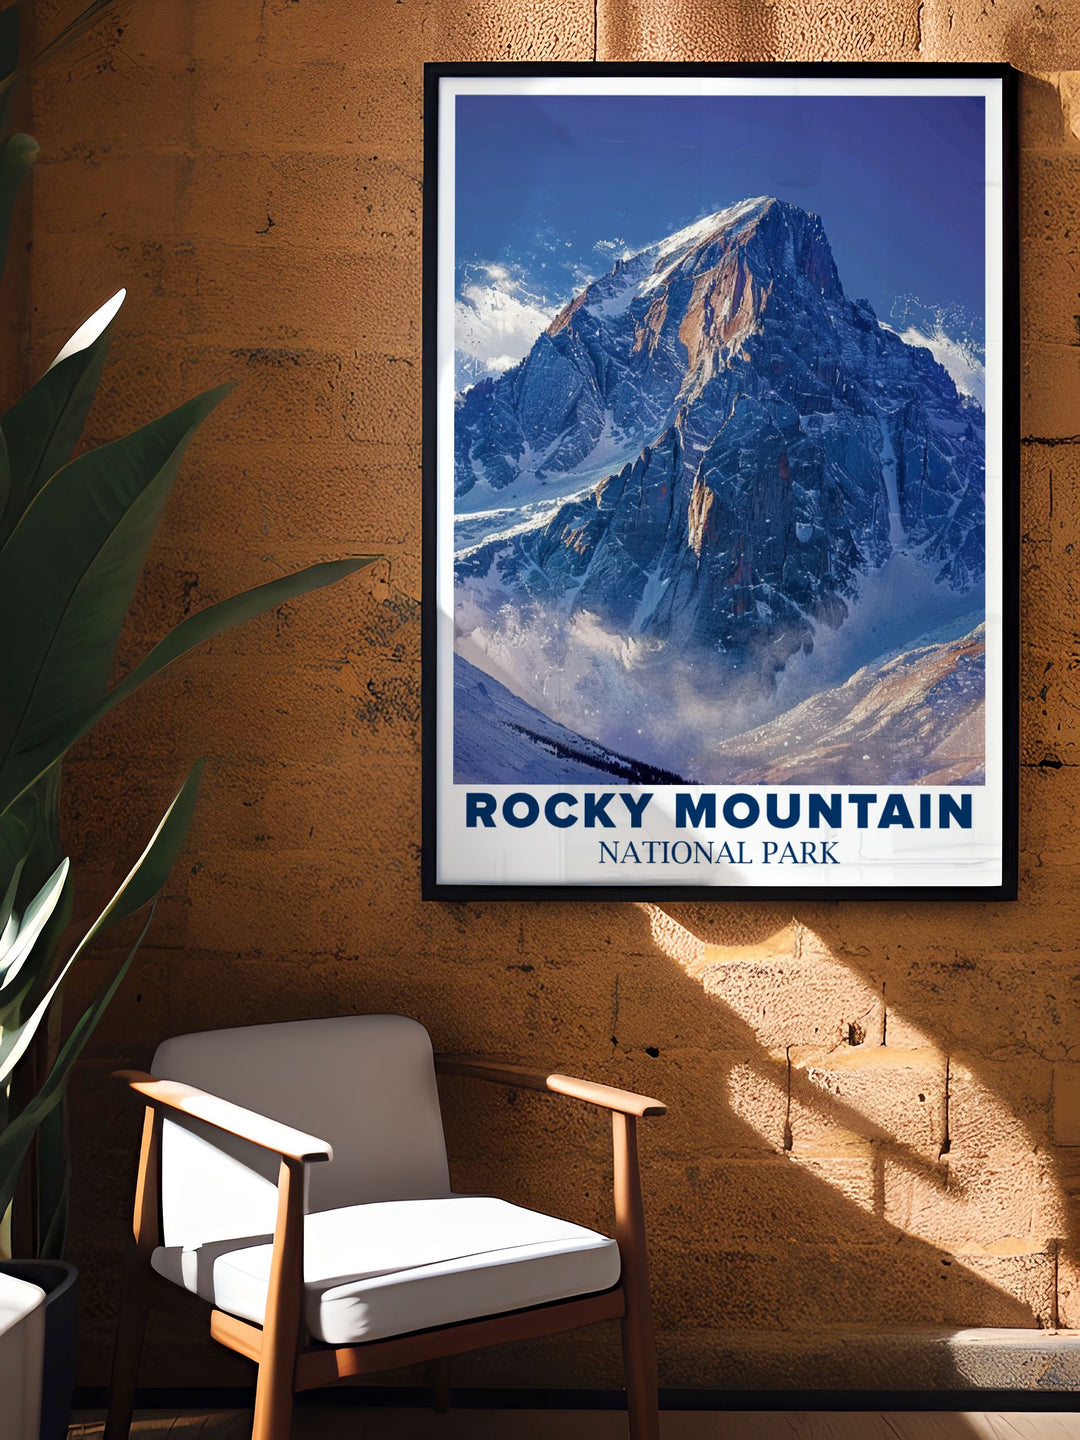 Long Peak artwork depicting the scenic beauty of Rocky Mountain National Park with its majestic peak and tranquil surroundings a perfect addition to any nature lovers collection or as a unique gift